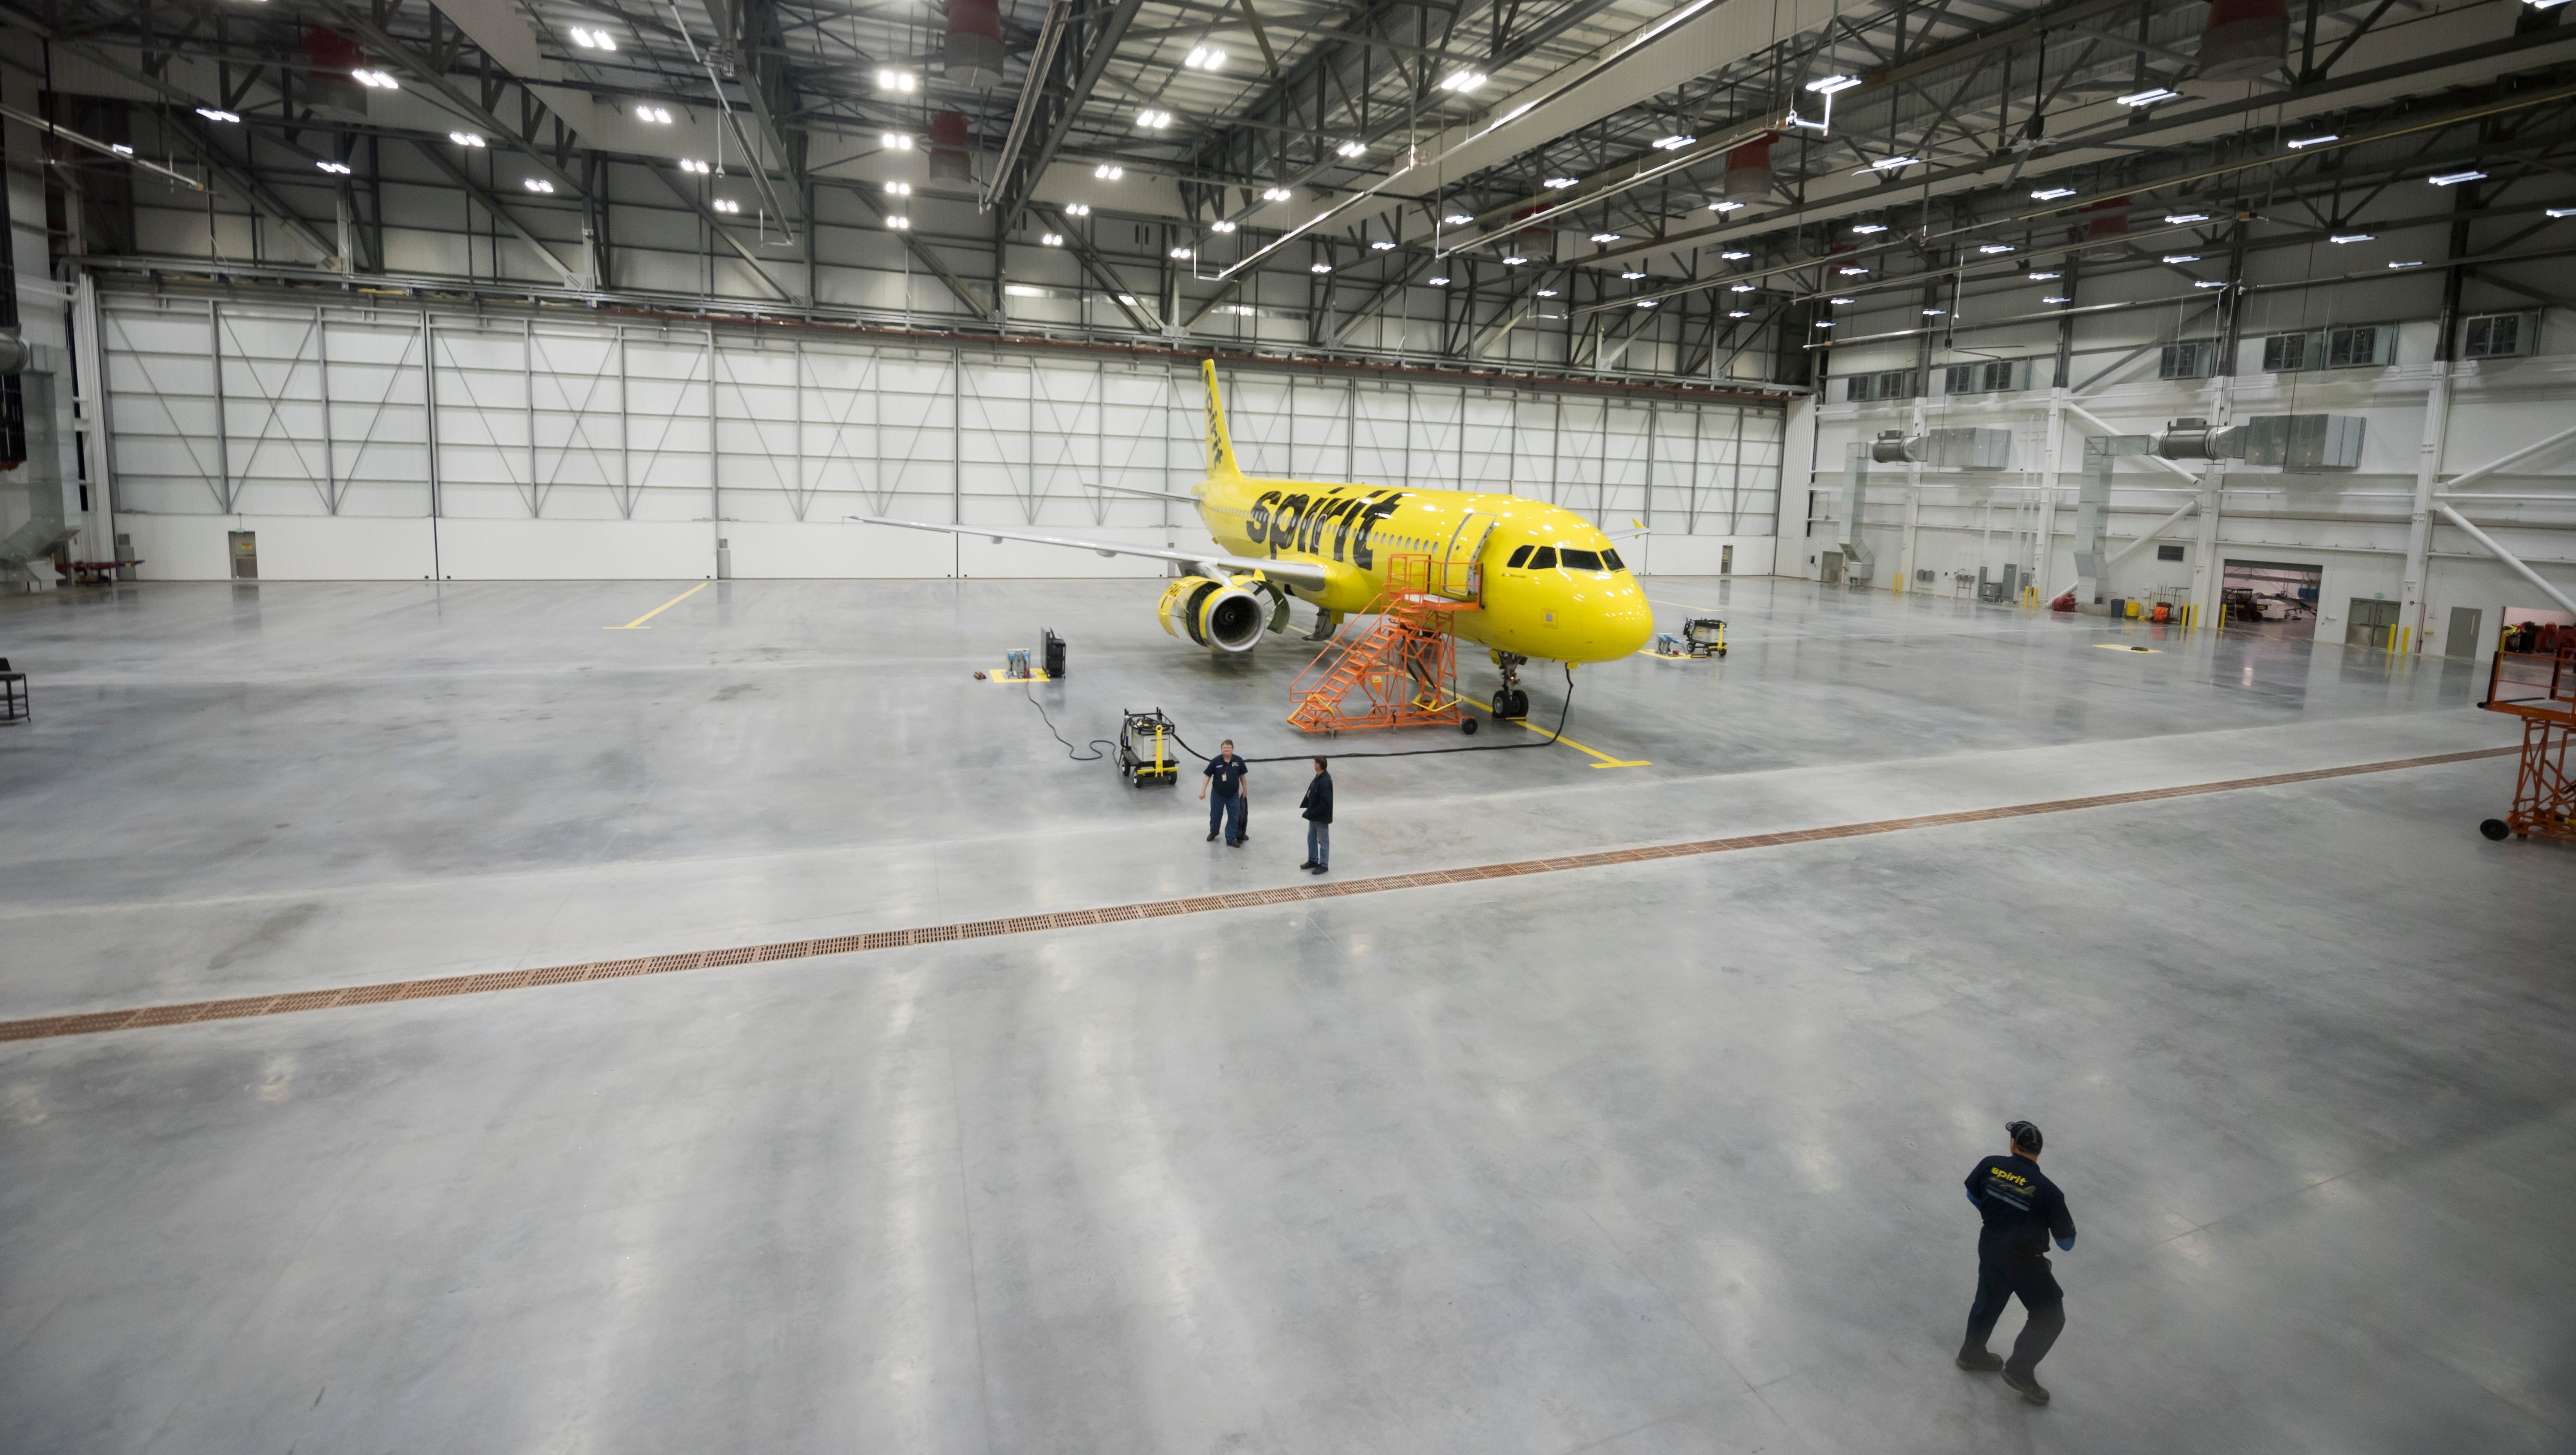 An A320 "operational spare" airplane sits in the main hangar bay.